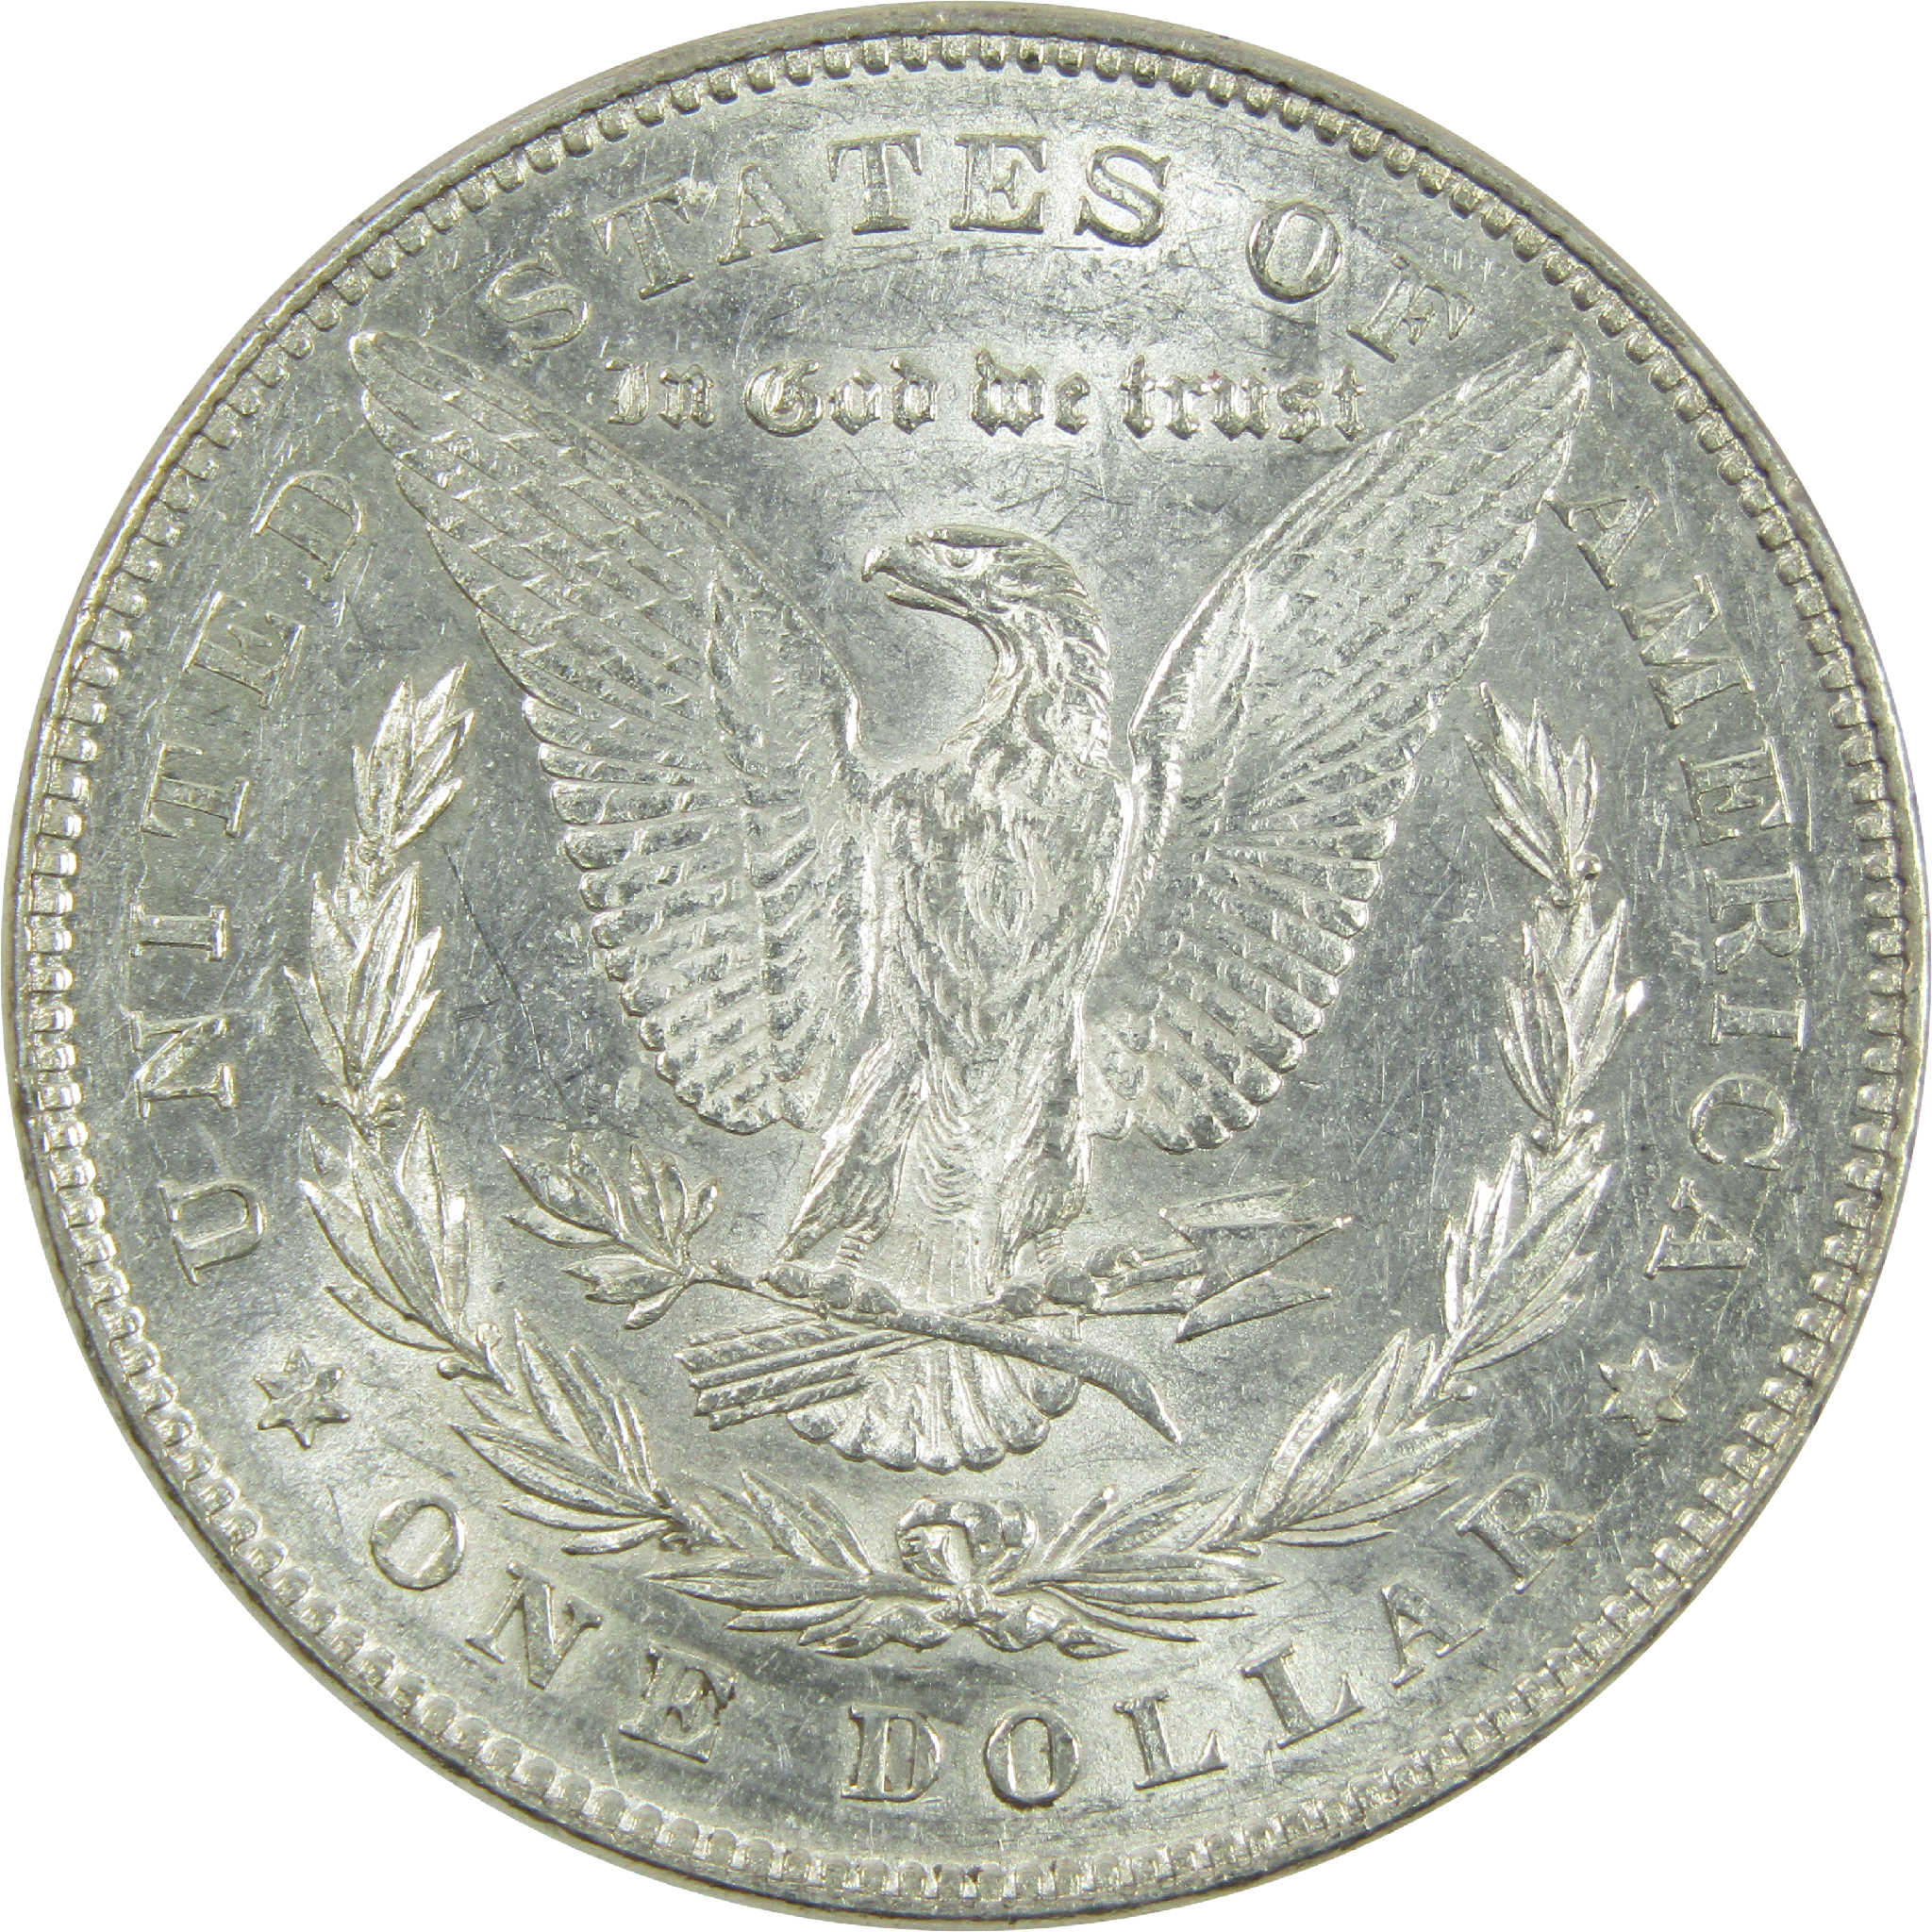 1878 7TF Rev 78 Morgan Dollar AU About Uncirculated Silver SKU:I13502 - Morgan coin - Morgan silver dollar - Morgan silver dollar for sale - Profile Coins &amp; Collectibles